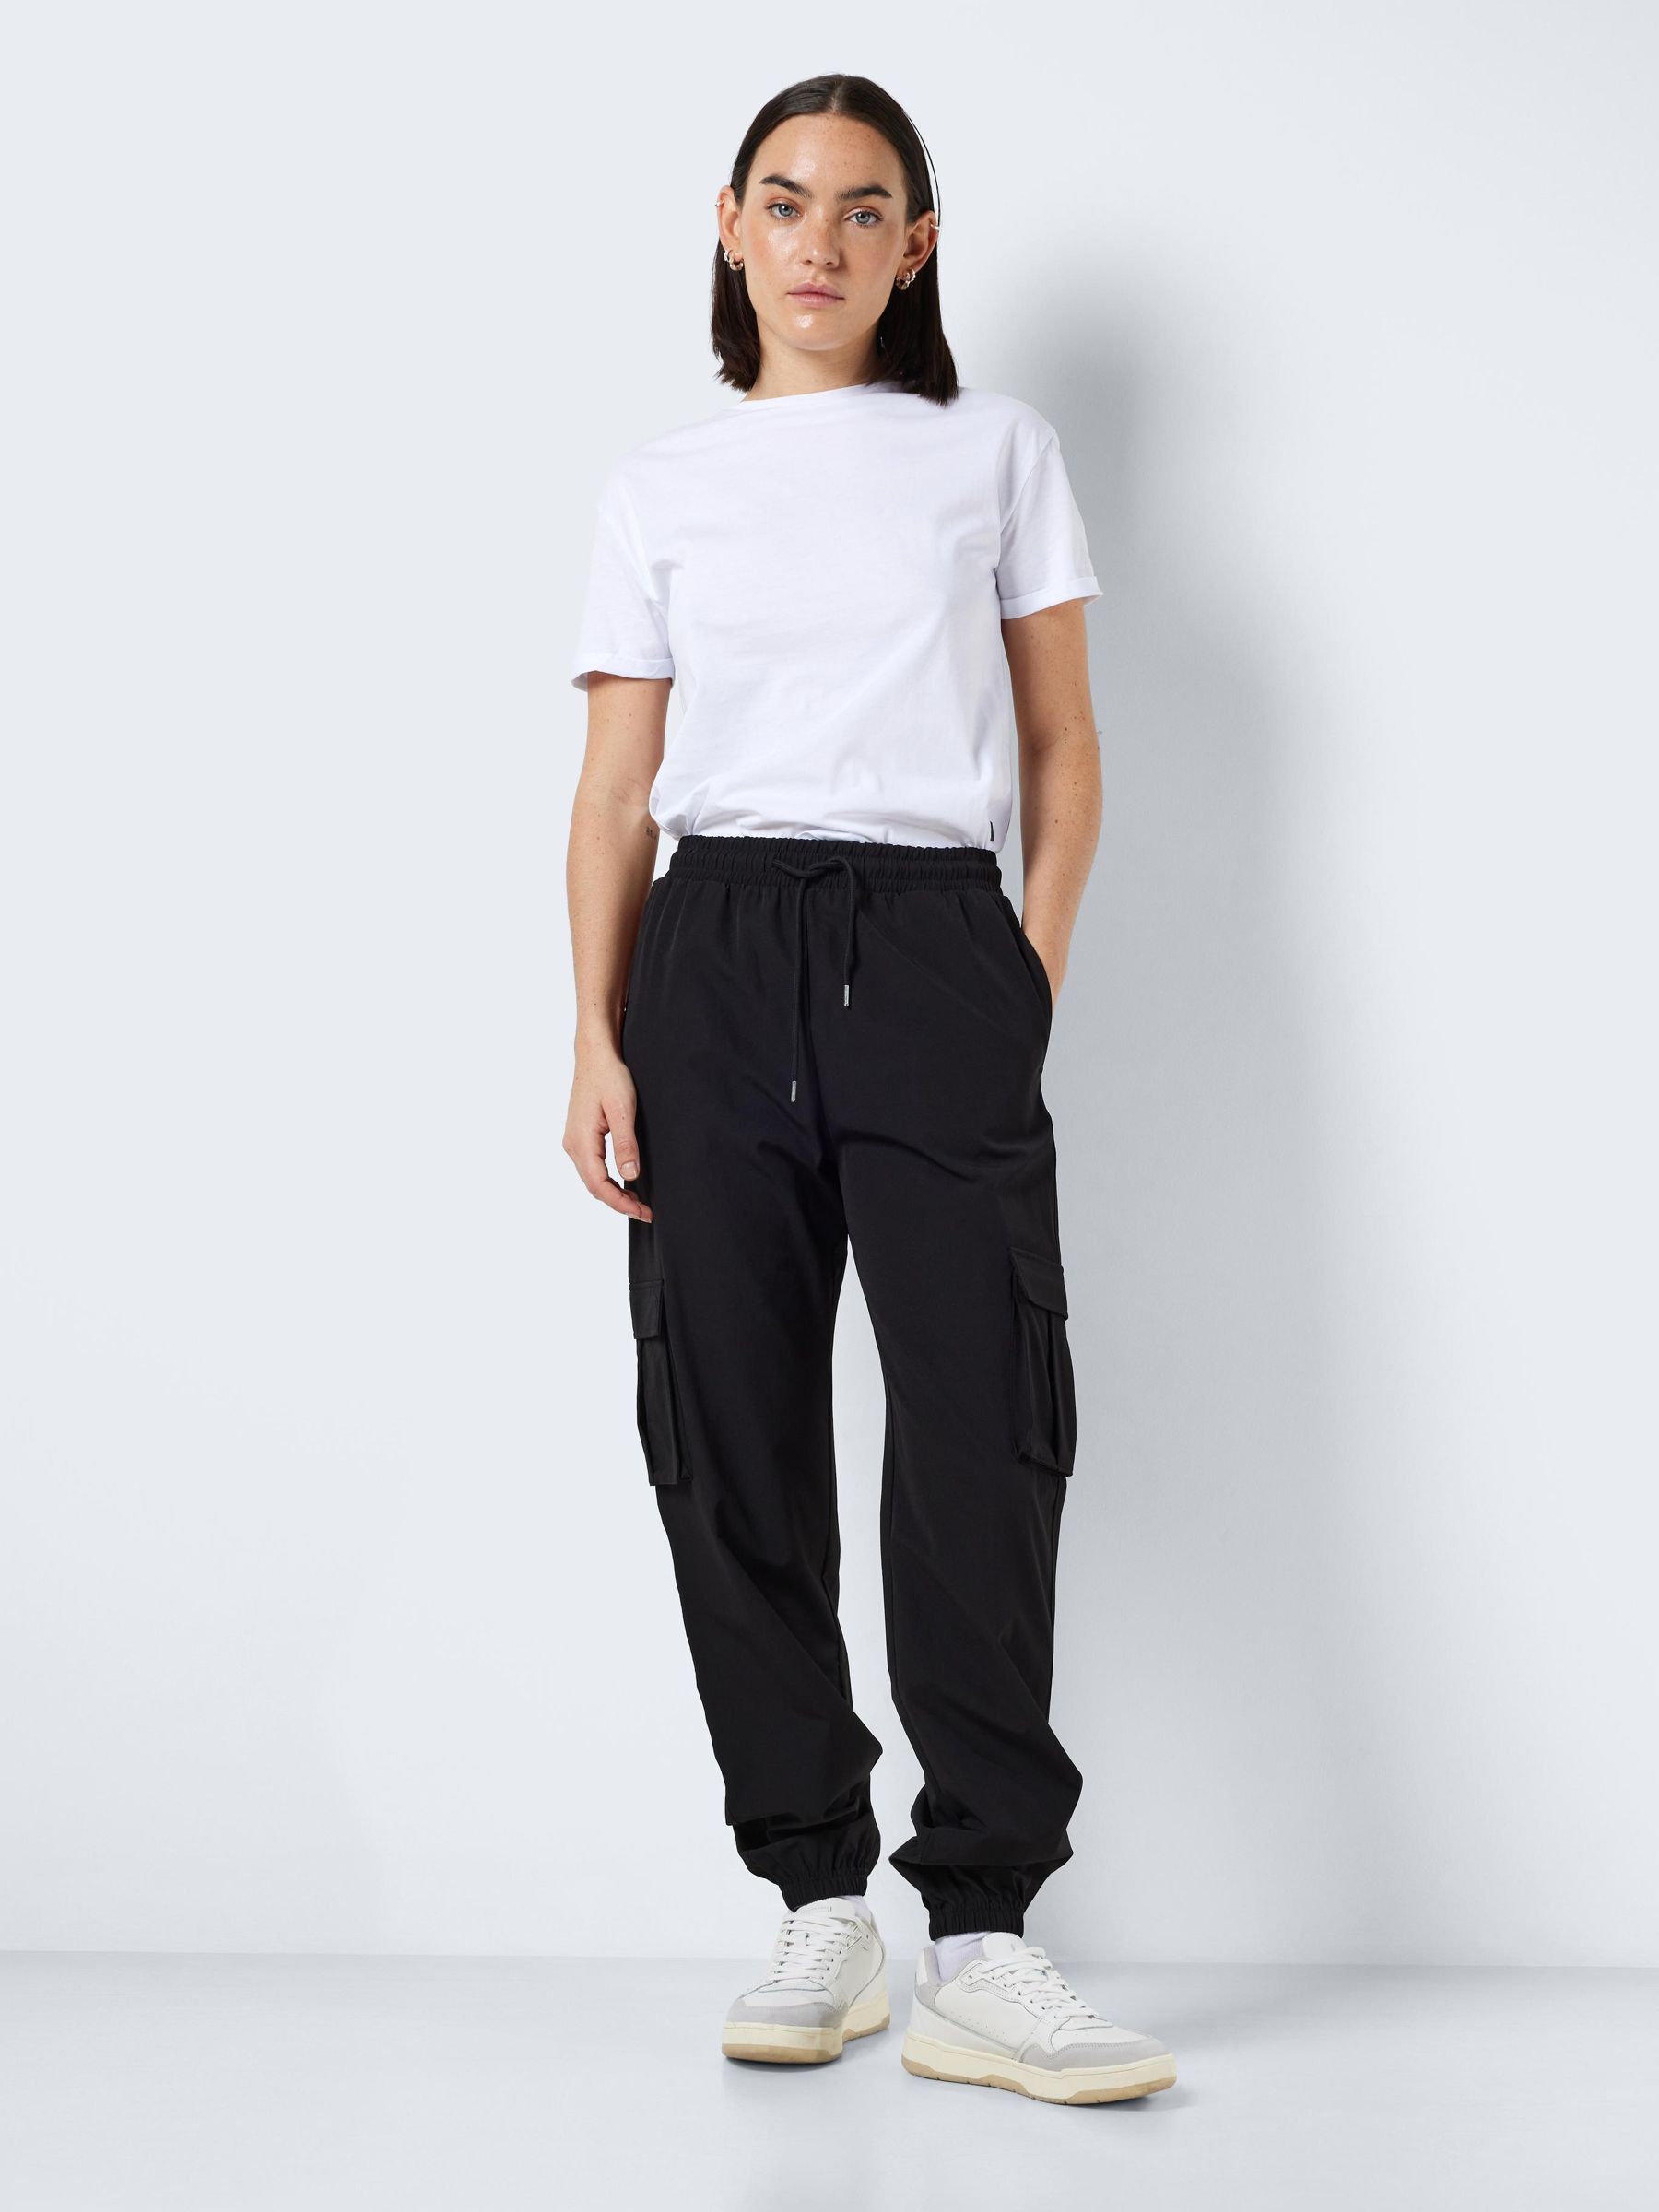 Find your new trousers from Noisy May online